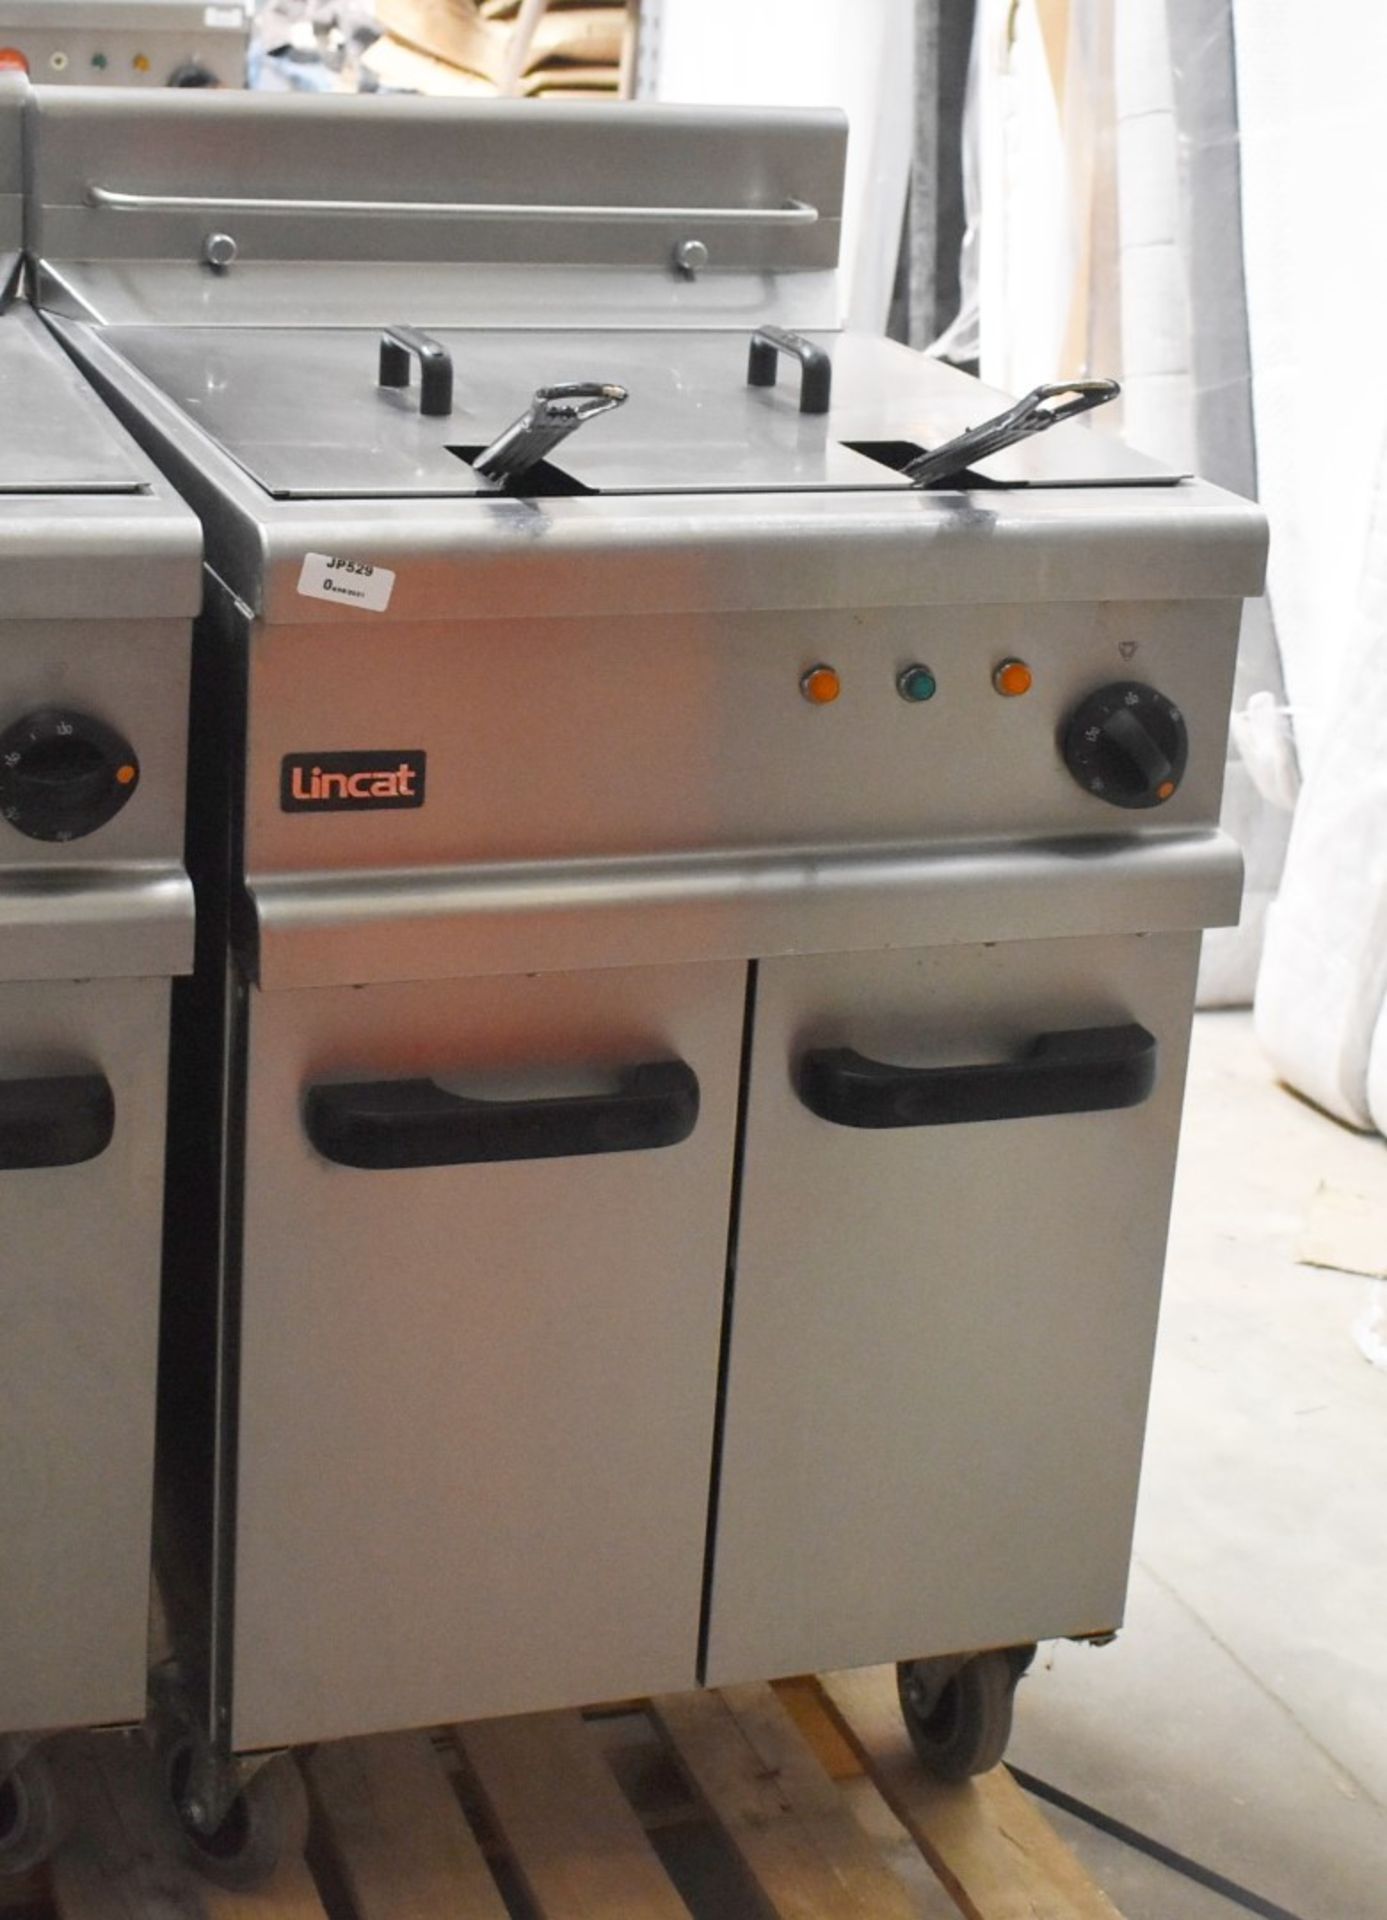 1 x Lincat Opus 700 OE7113 Single Large Tank Electric Fryer With Built In Filteration - 240V / 3PH P - Image 5 of 11